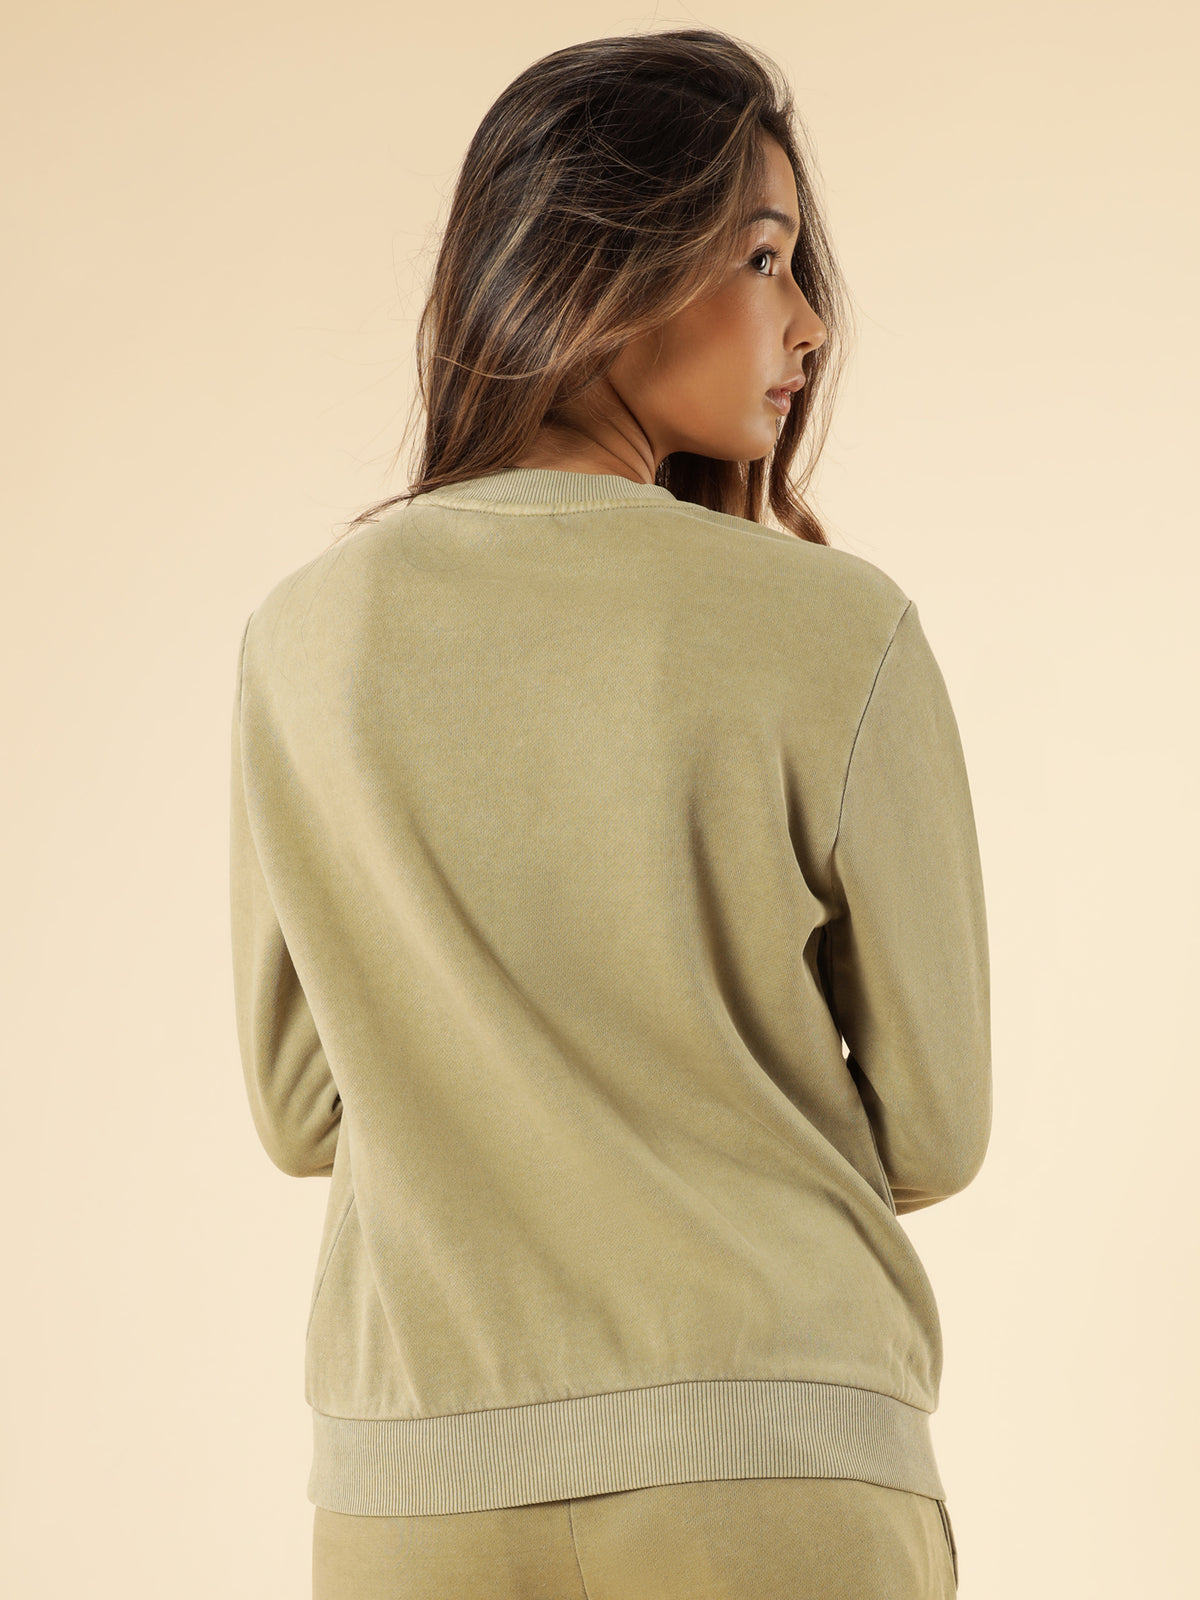 Fortify Sweater in Olive Grey